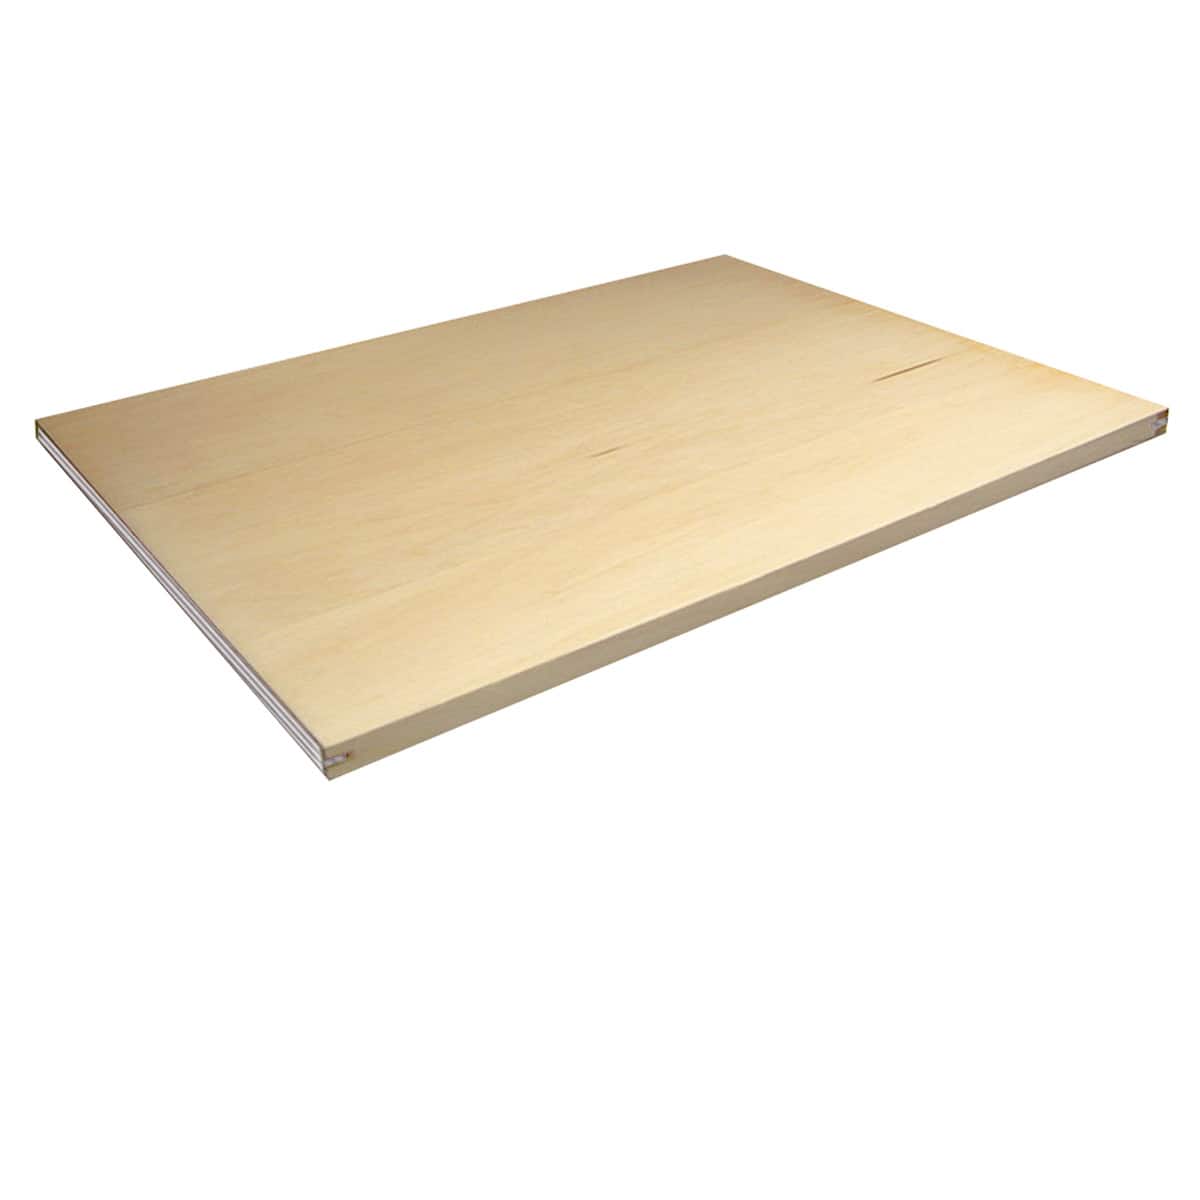  18 x 24 Wood Drawing Board, Art Painting Panel Portable 4k Sketch  Boards Fit for A2 Sized Paper